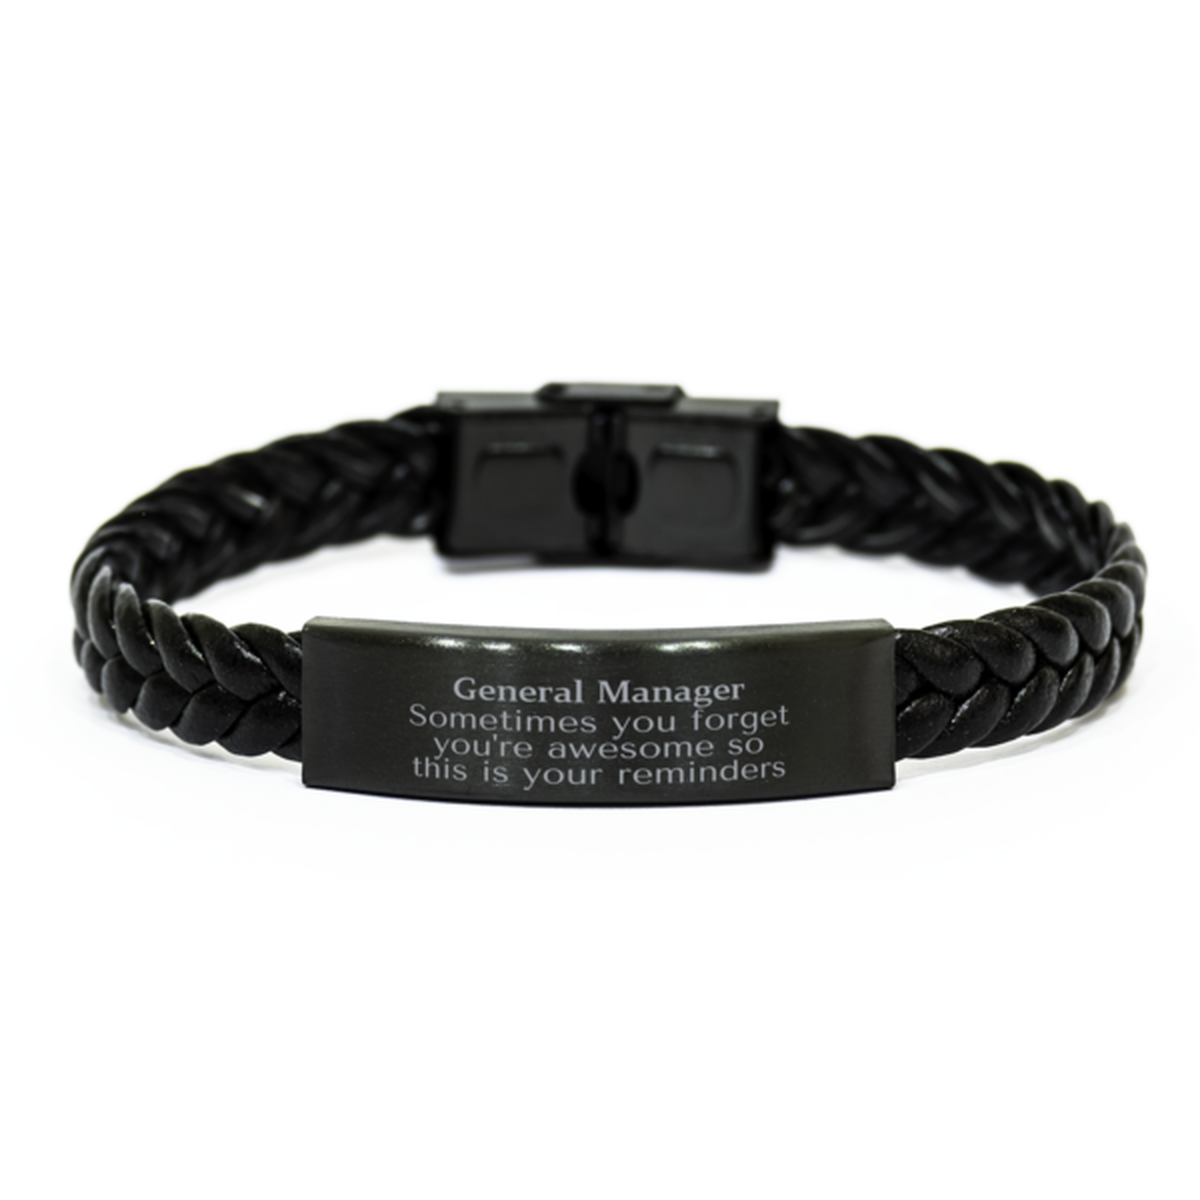 Sentimental General Manager Braided Leather Bracelet, General Manager Sometimes you forget you're awesome so this is your reminders, Graduation Christmas Birthday Gifts for General Manager, Men, Women, Coworkers